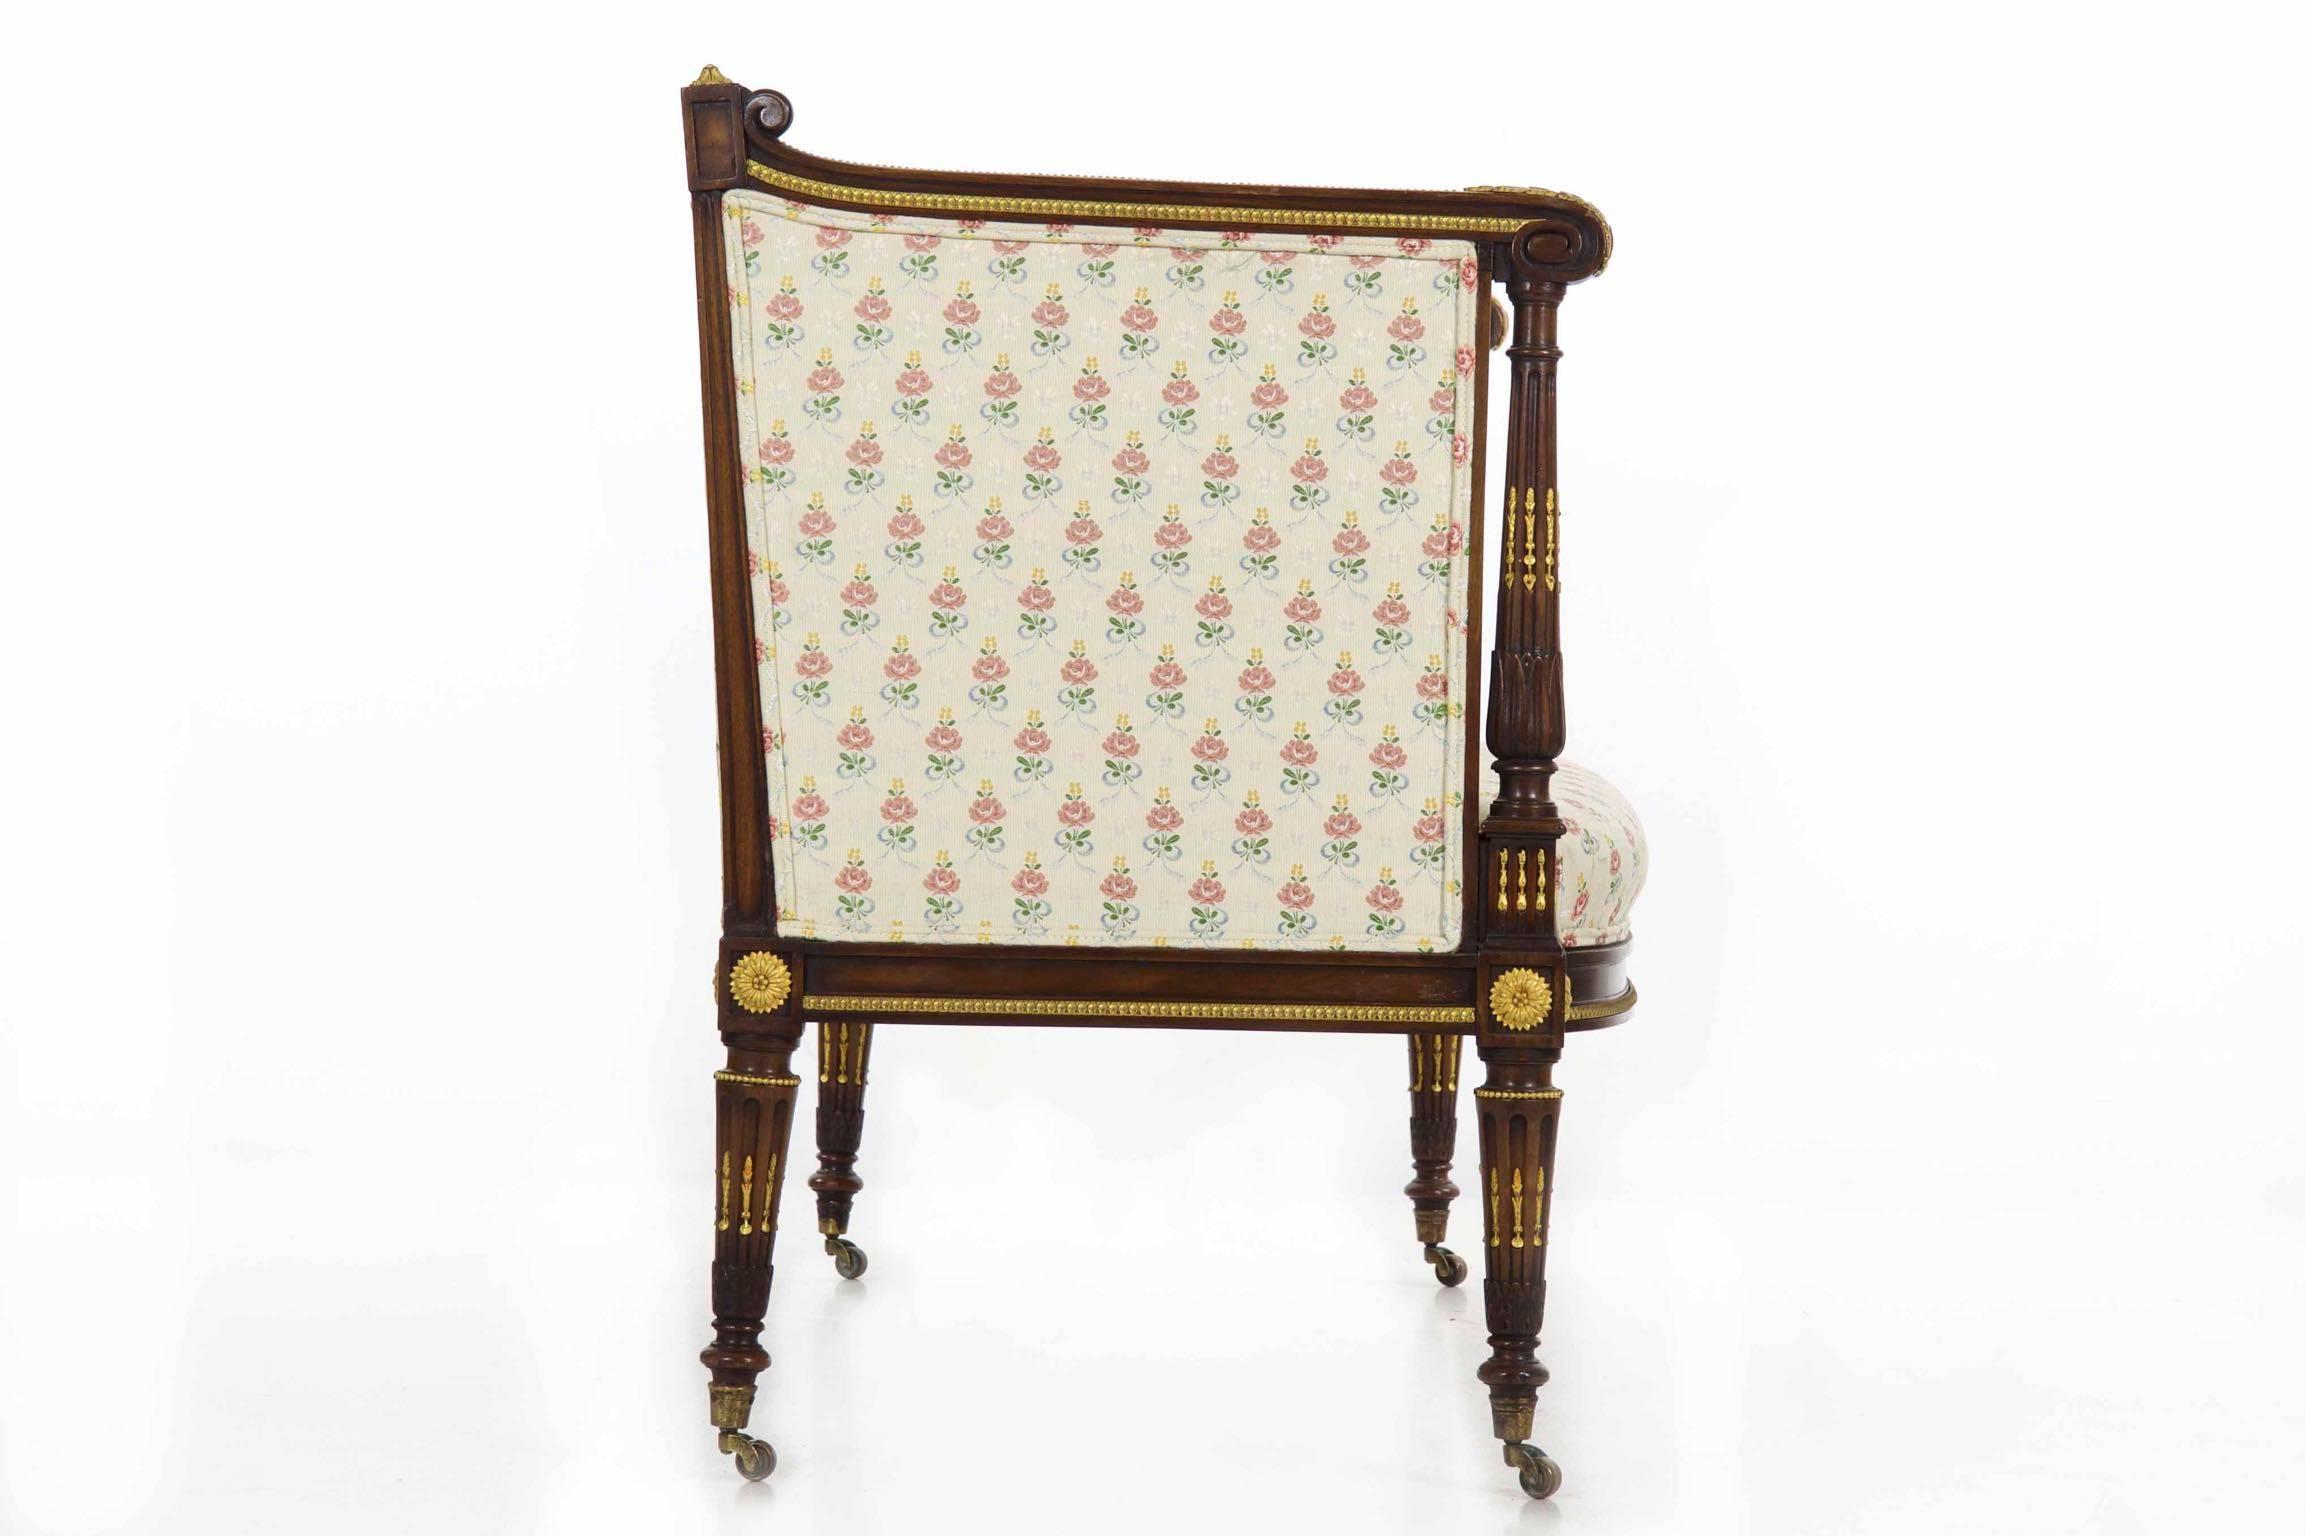 Bronze French Louis XVI Style Ormolu and Mahogany Canapé Sofa Settee, Late 19th Century